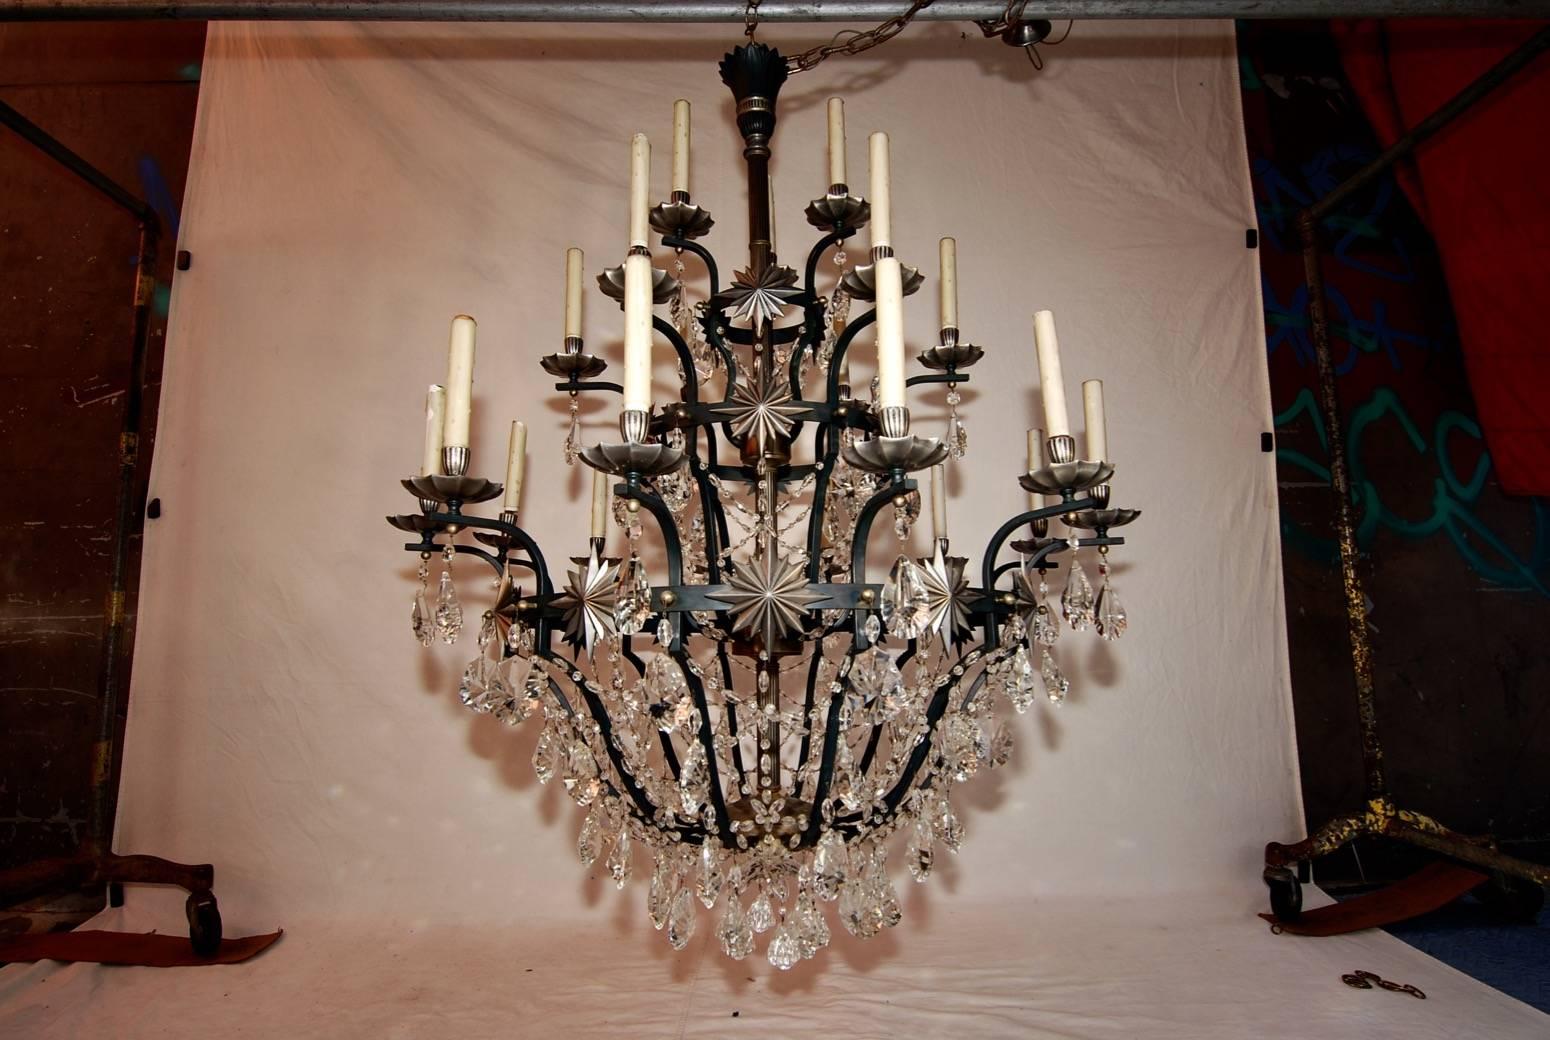 We have over 3000 antique sconces and over 1000 antique lights, if you need a specific pair of sconces or lights use the “Contact Dealer” button to ask us, we might have it in our store
We also have our own line of wrought iron reproduction sconces